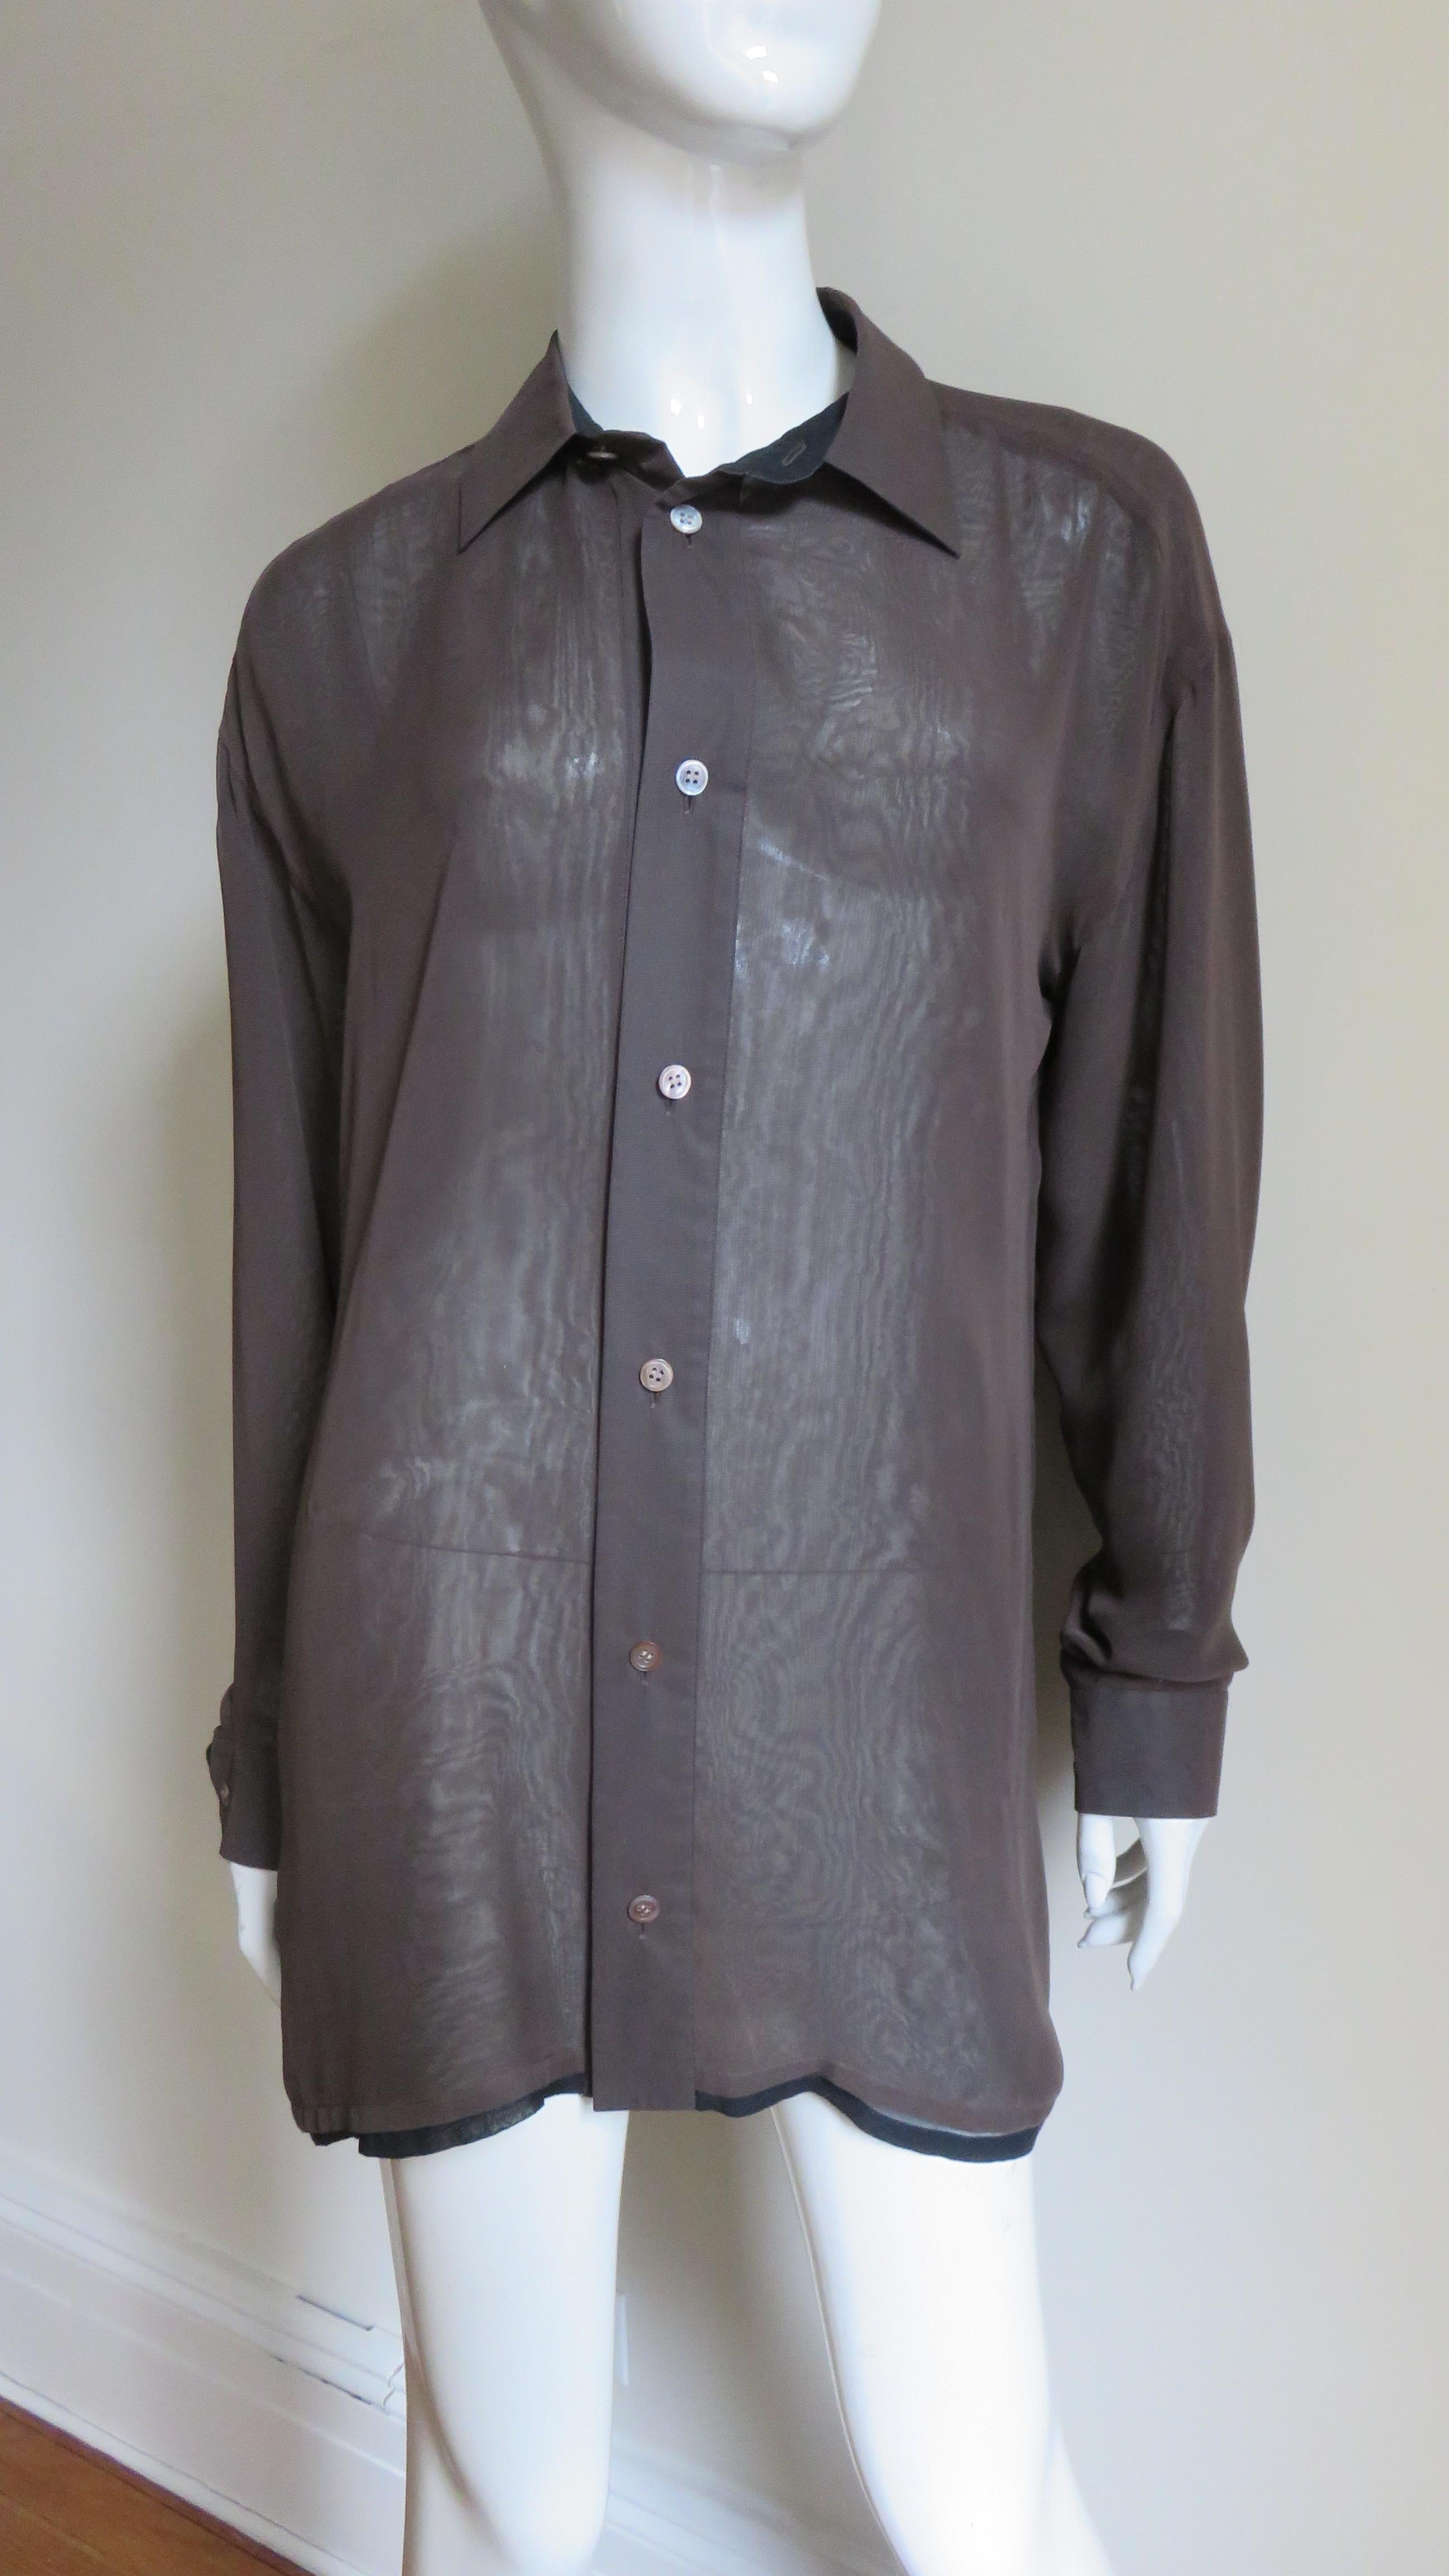 A fabulous 2 layer shirt from Issey Miyake.  It is comprised of 2 semi sheer layers, a black layer with a brown layer on top, the black layer peeks out at the hem.  It has a shirt collar, back yoke and long sleeves with button cuffs.  The body is